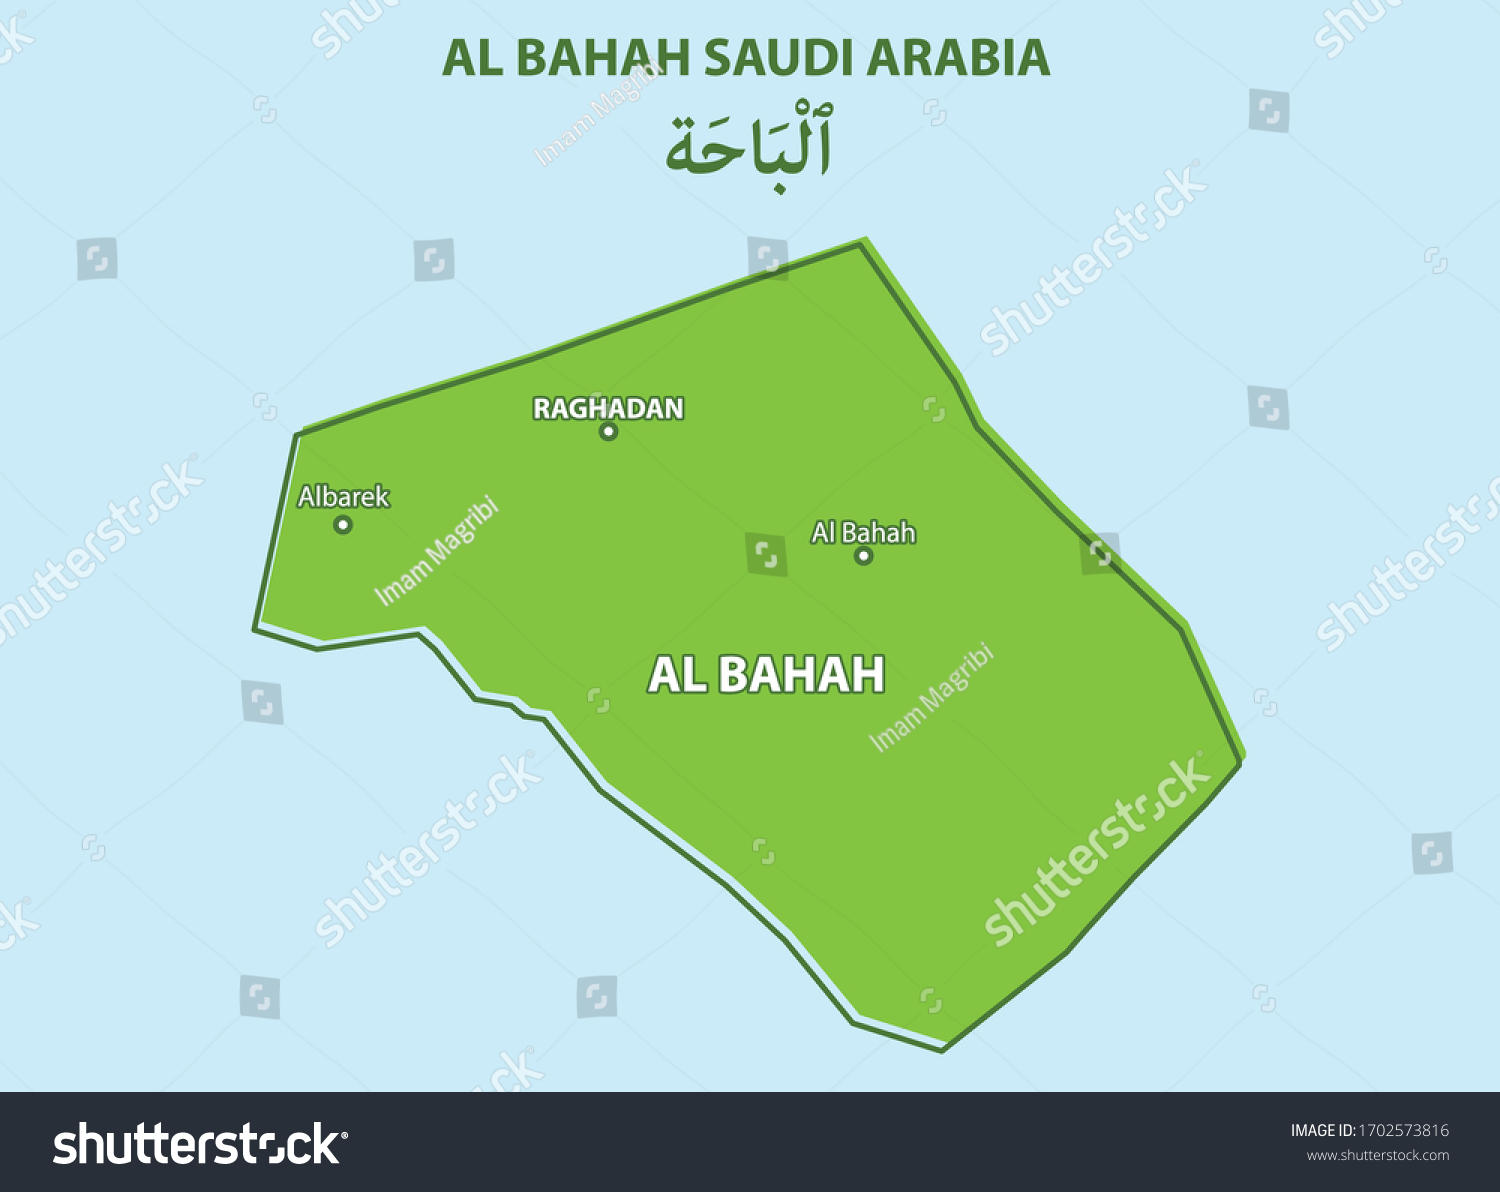 SVG of Al Bahan Prefecture Map Saudia Arabia Country, letters with arabic character means the name of city or prefecture. The means same as the words above svg